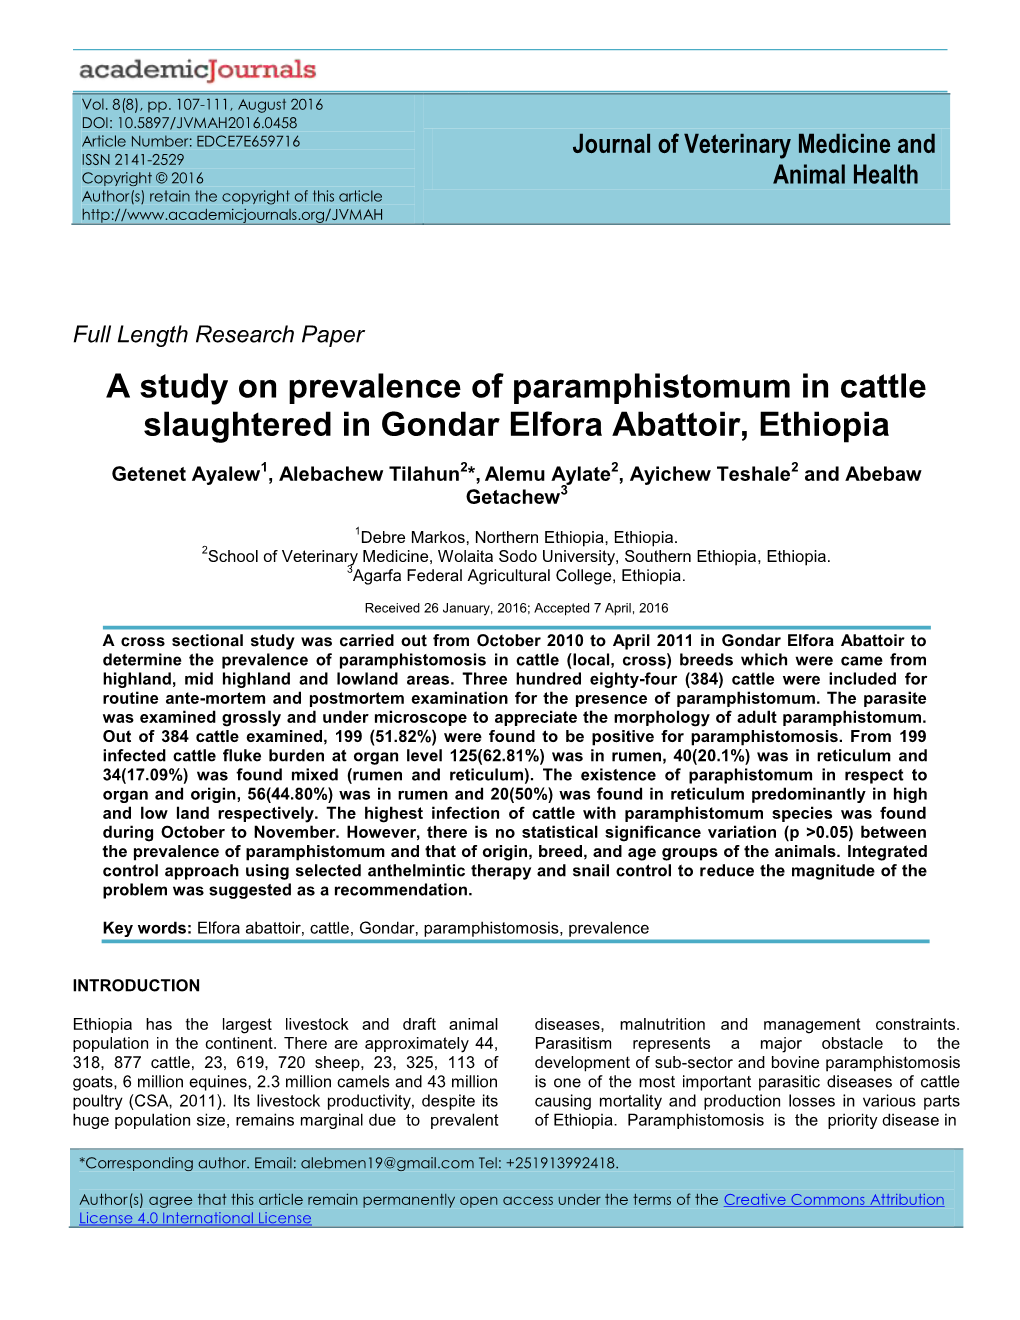 A Study on Prevalence of Paramphistomum in Cattle Slaughtered in Gondar Elfora Abattoir, Ethiopia